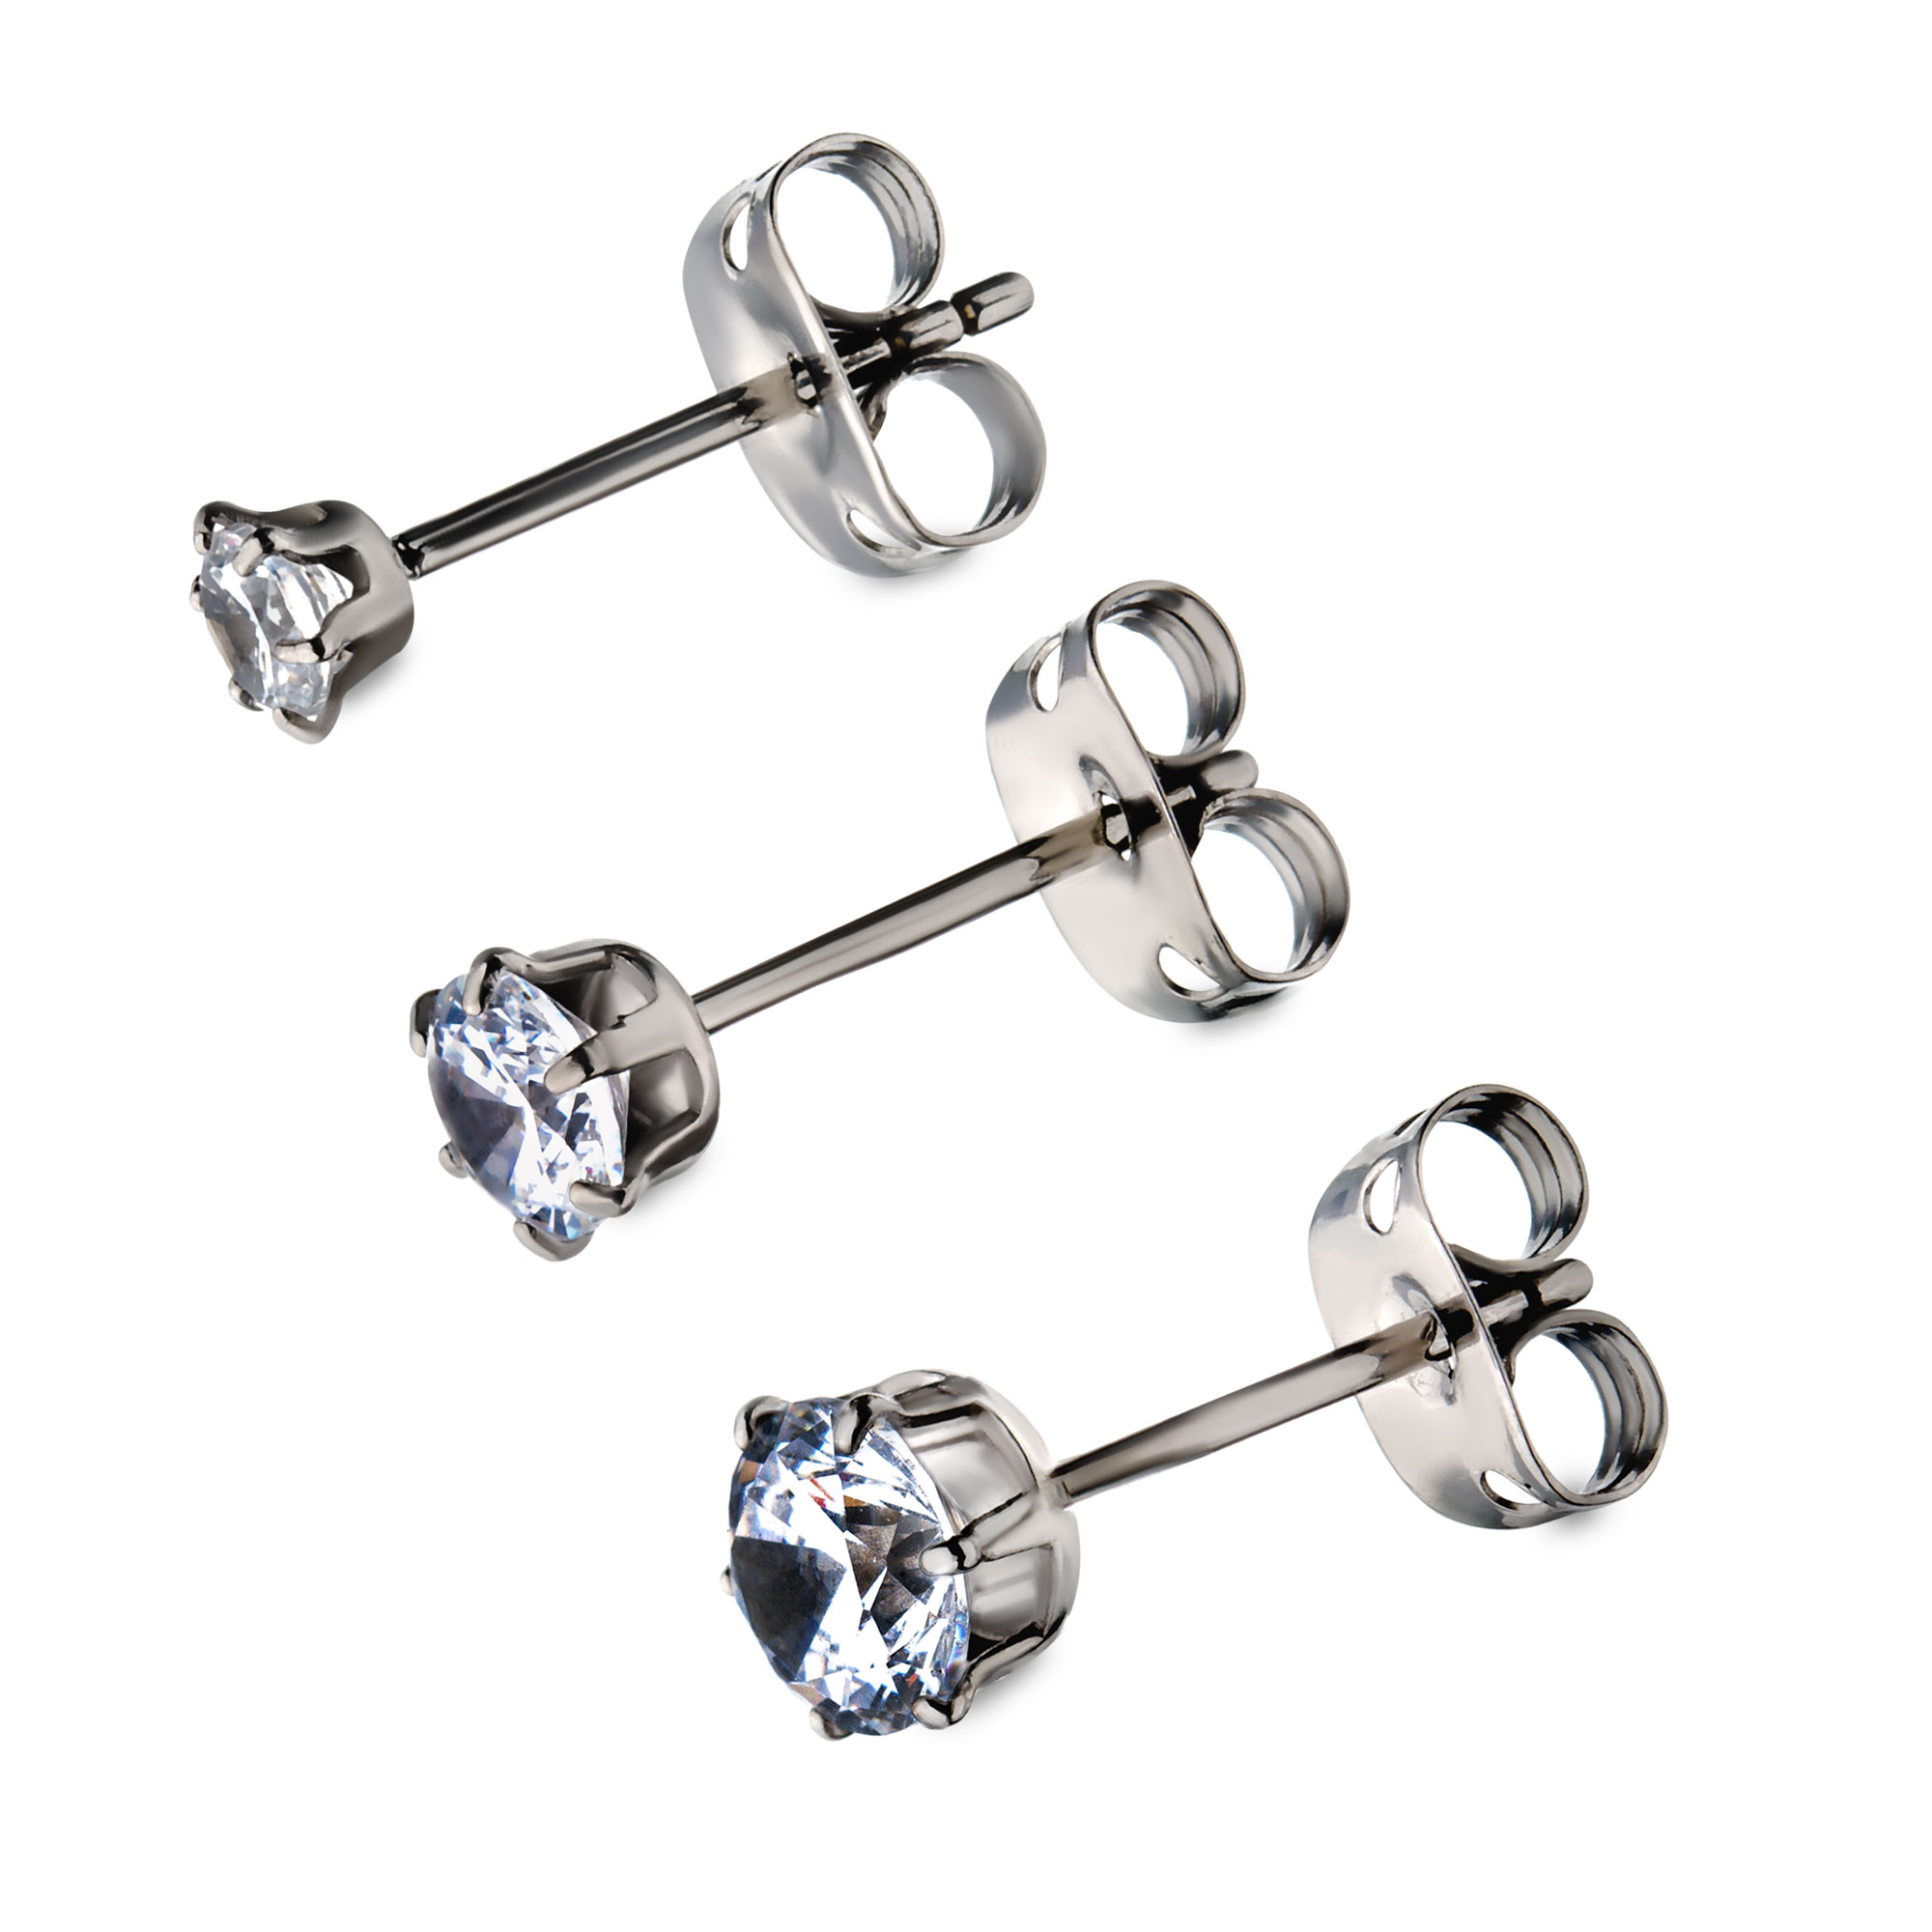 20g Titanium Post and Butterfly Back with Prong Set CZ Stud Earrings Image 2 K. Martin Jeweler Dodge City, KS